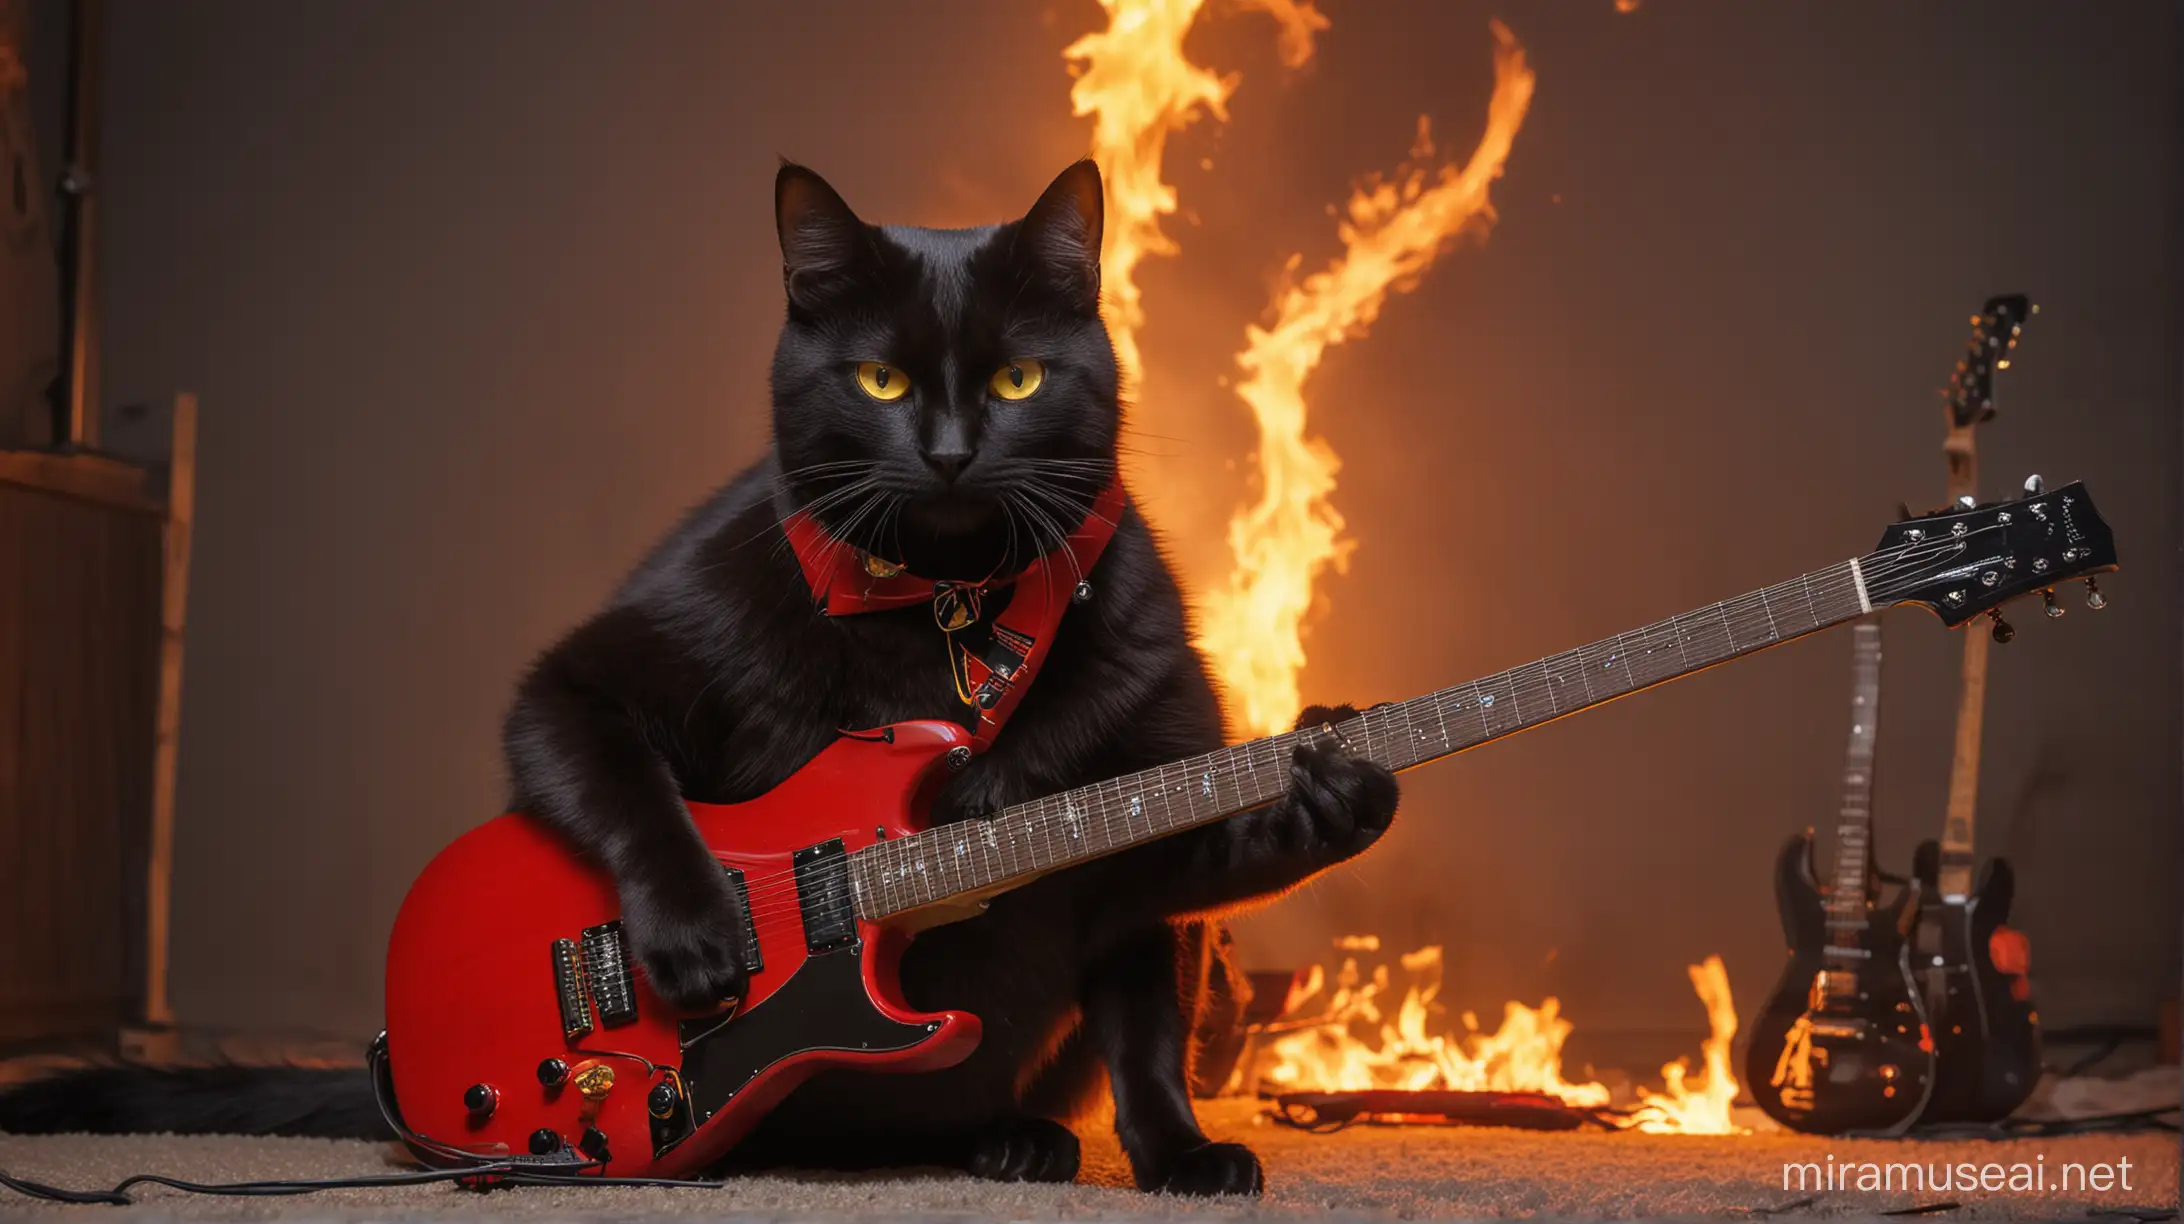 Mystical Black Cat with Electric Guitar amidst Fiery Ambiance